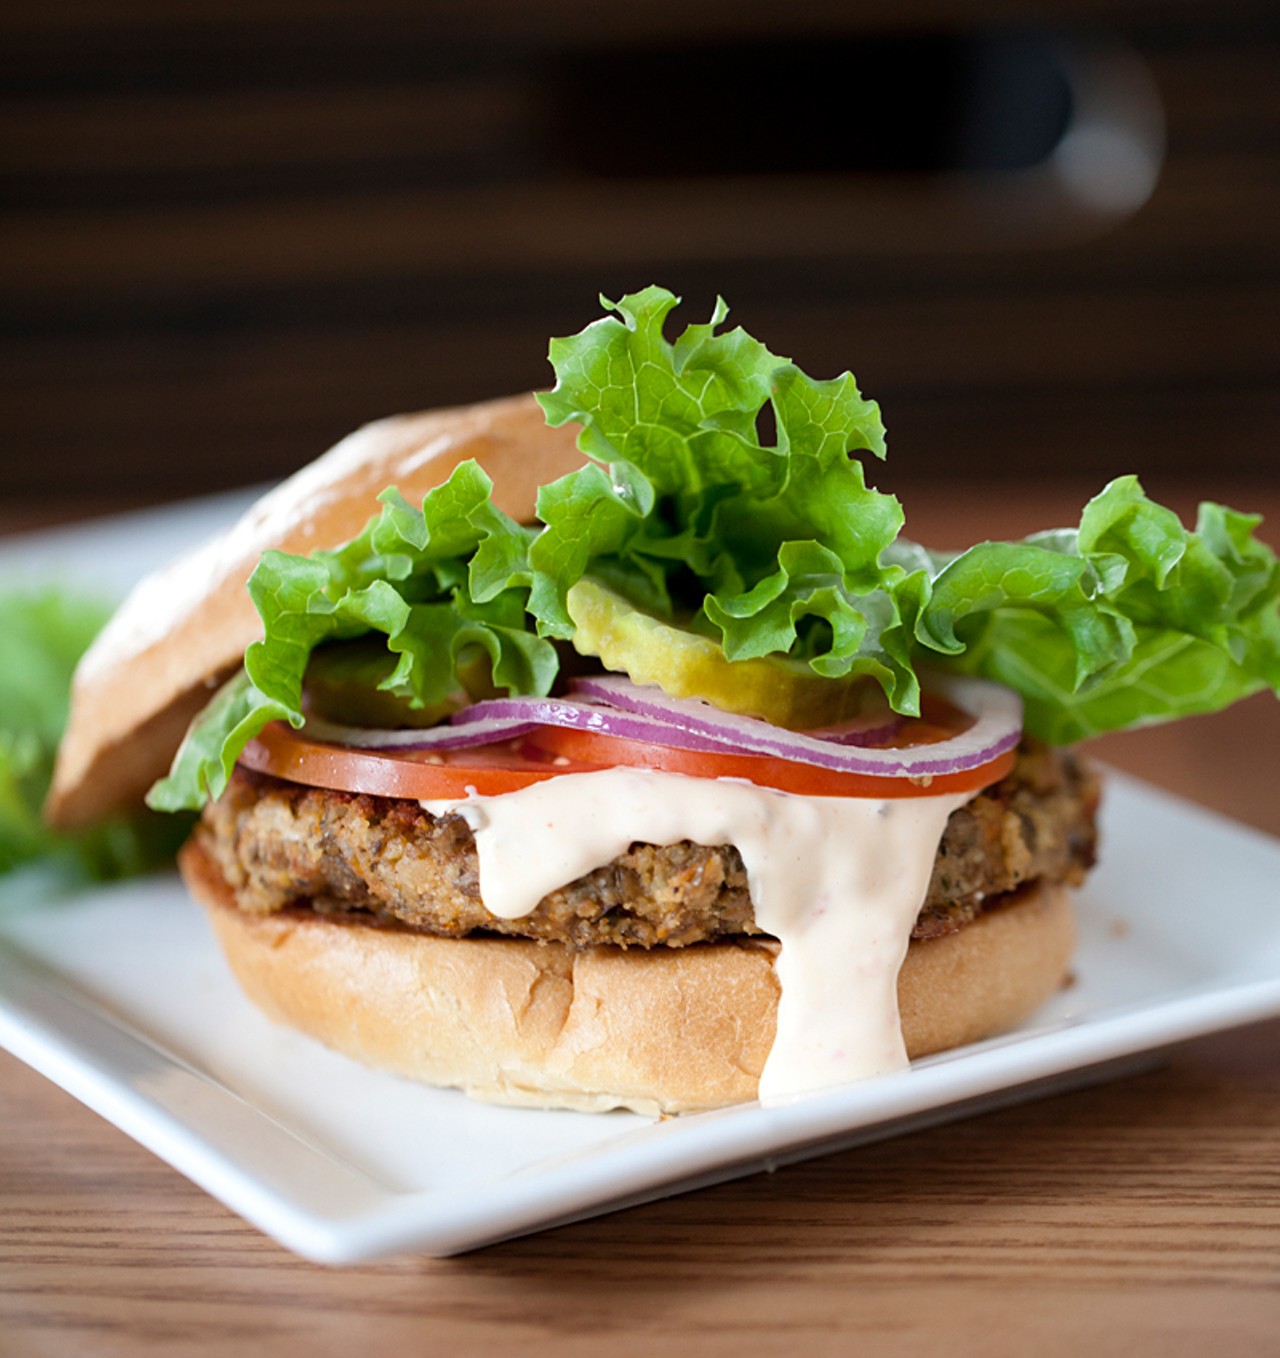 The veggie burger is prepared with lentils, vegetables and whole grains served with roasted red pepper mayonnaise, tomato, onion and lettuce.